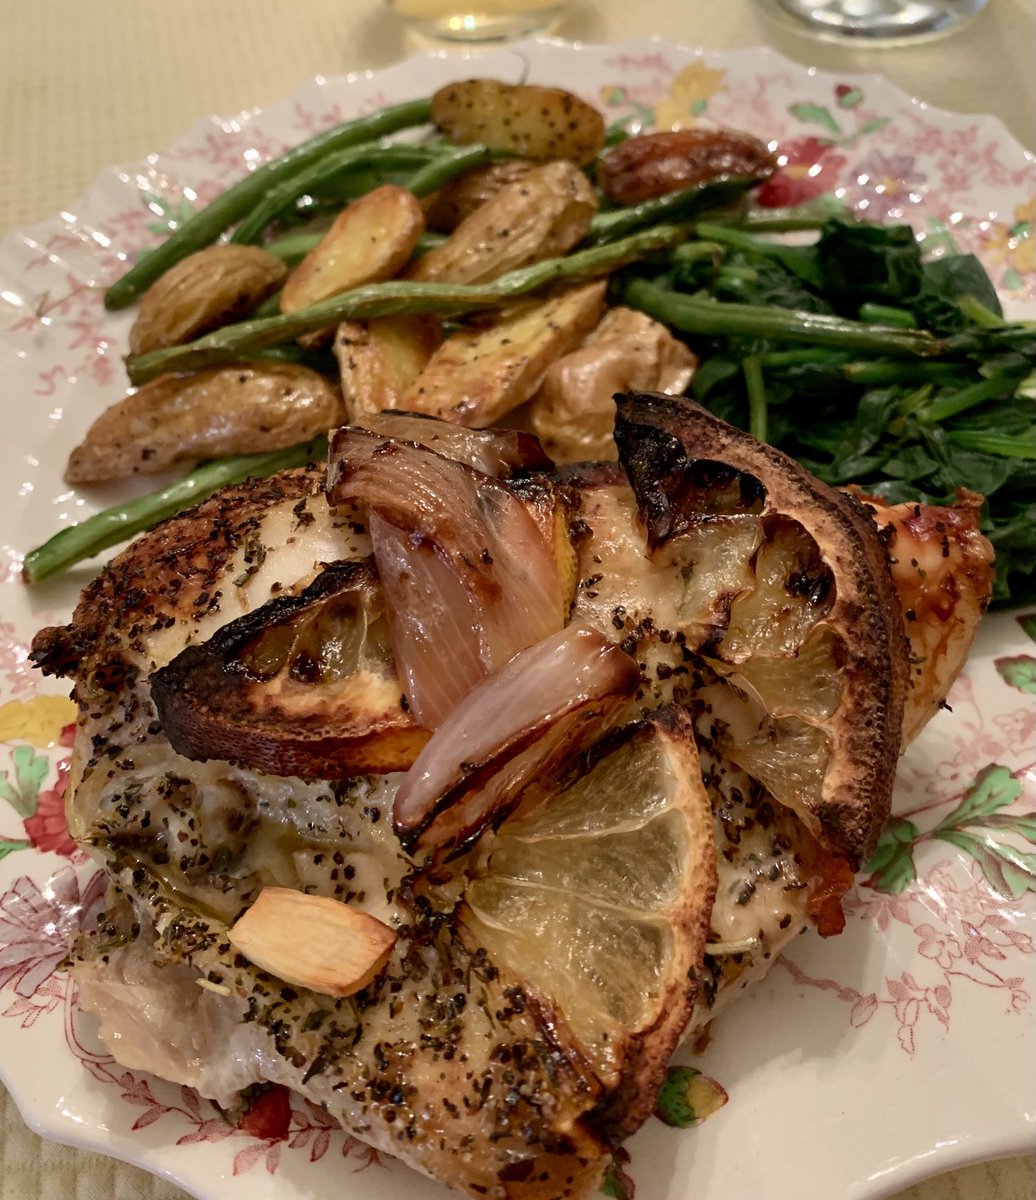 Lemon and shallot roasted chicken breasts, roasted fingerling potatoes and French green beans and steamed spinach #twittersupperclub  #inagarten.